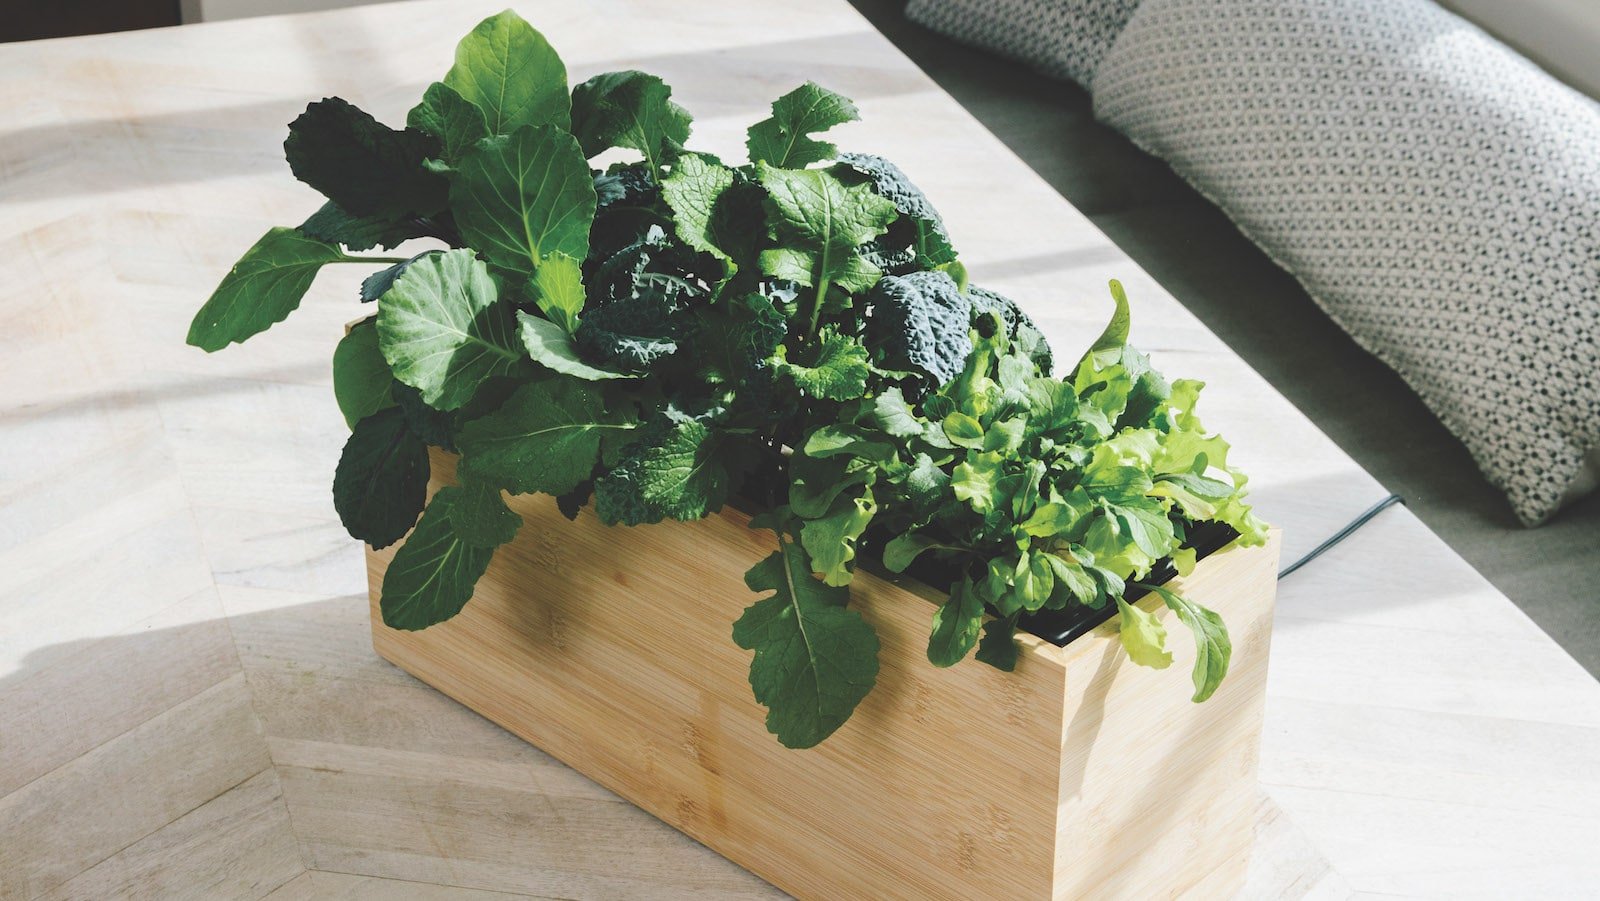 Modern Sprout Smart Indoor Hydroplanter lets you grow a garden & vegetables all year round